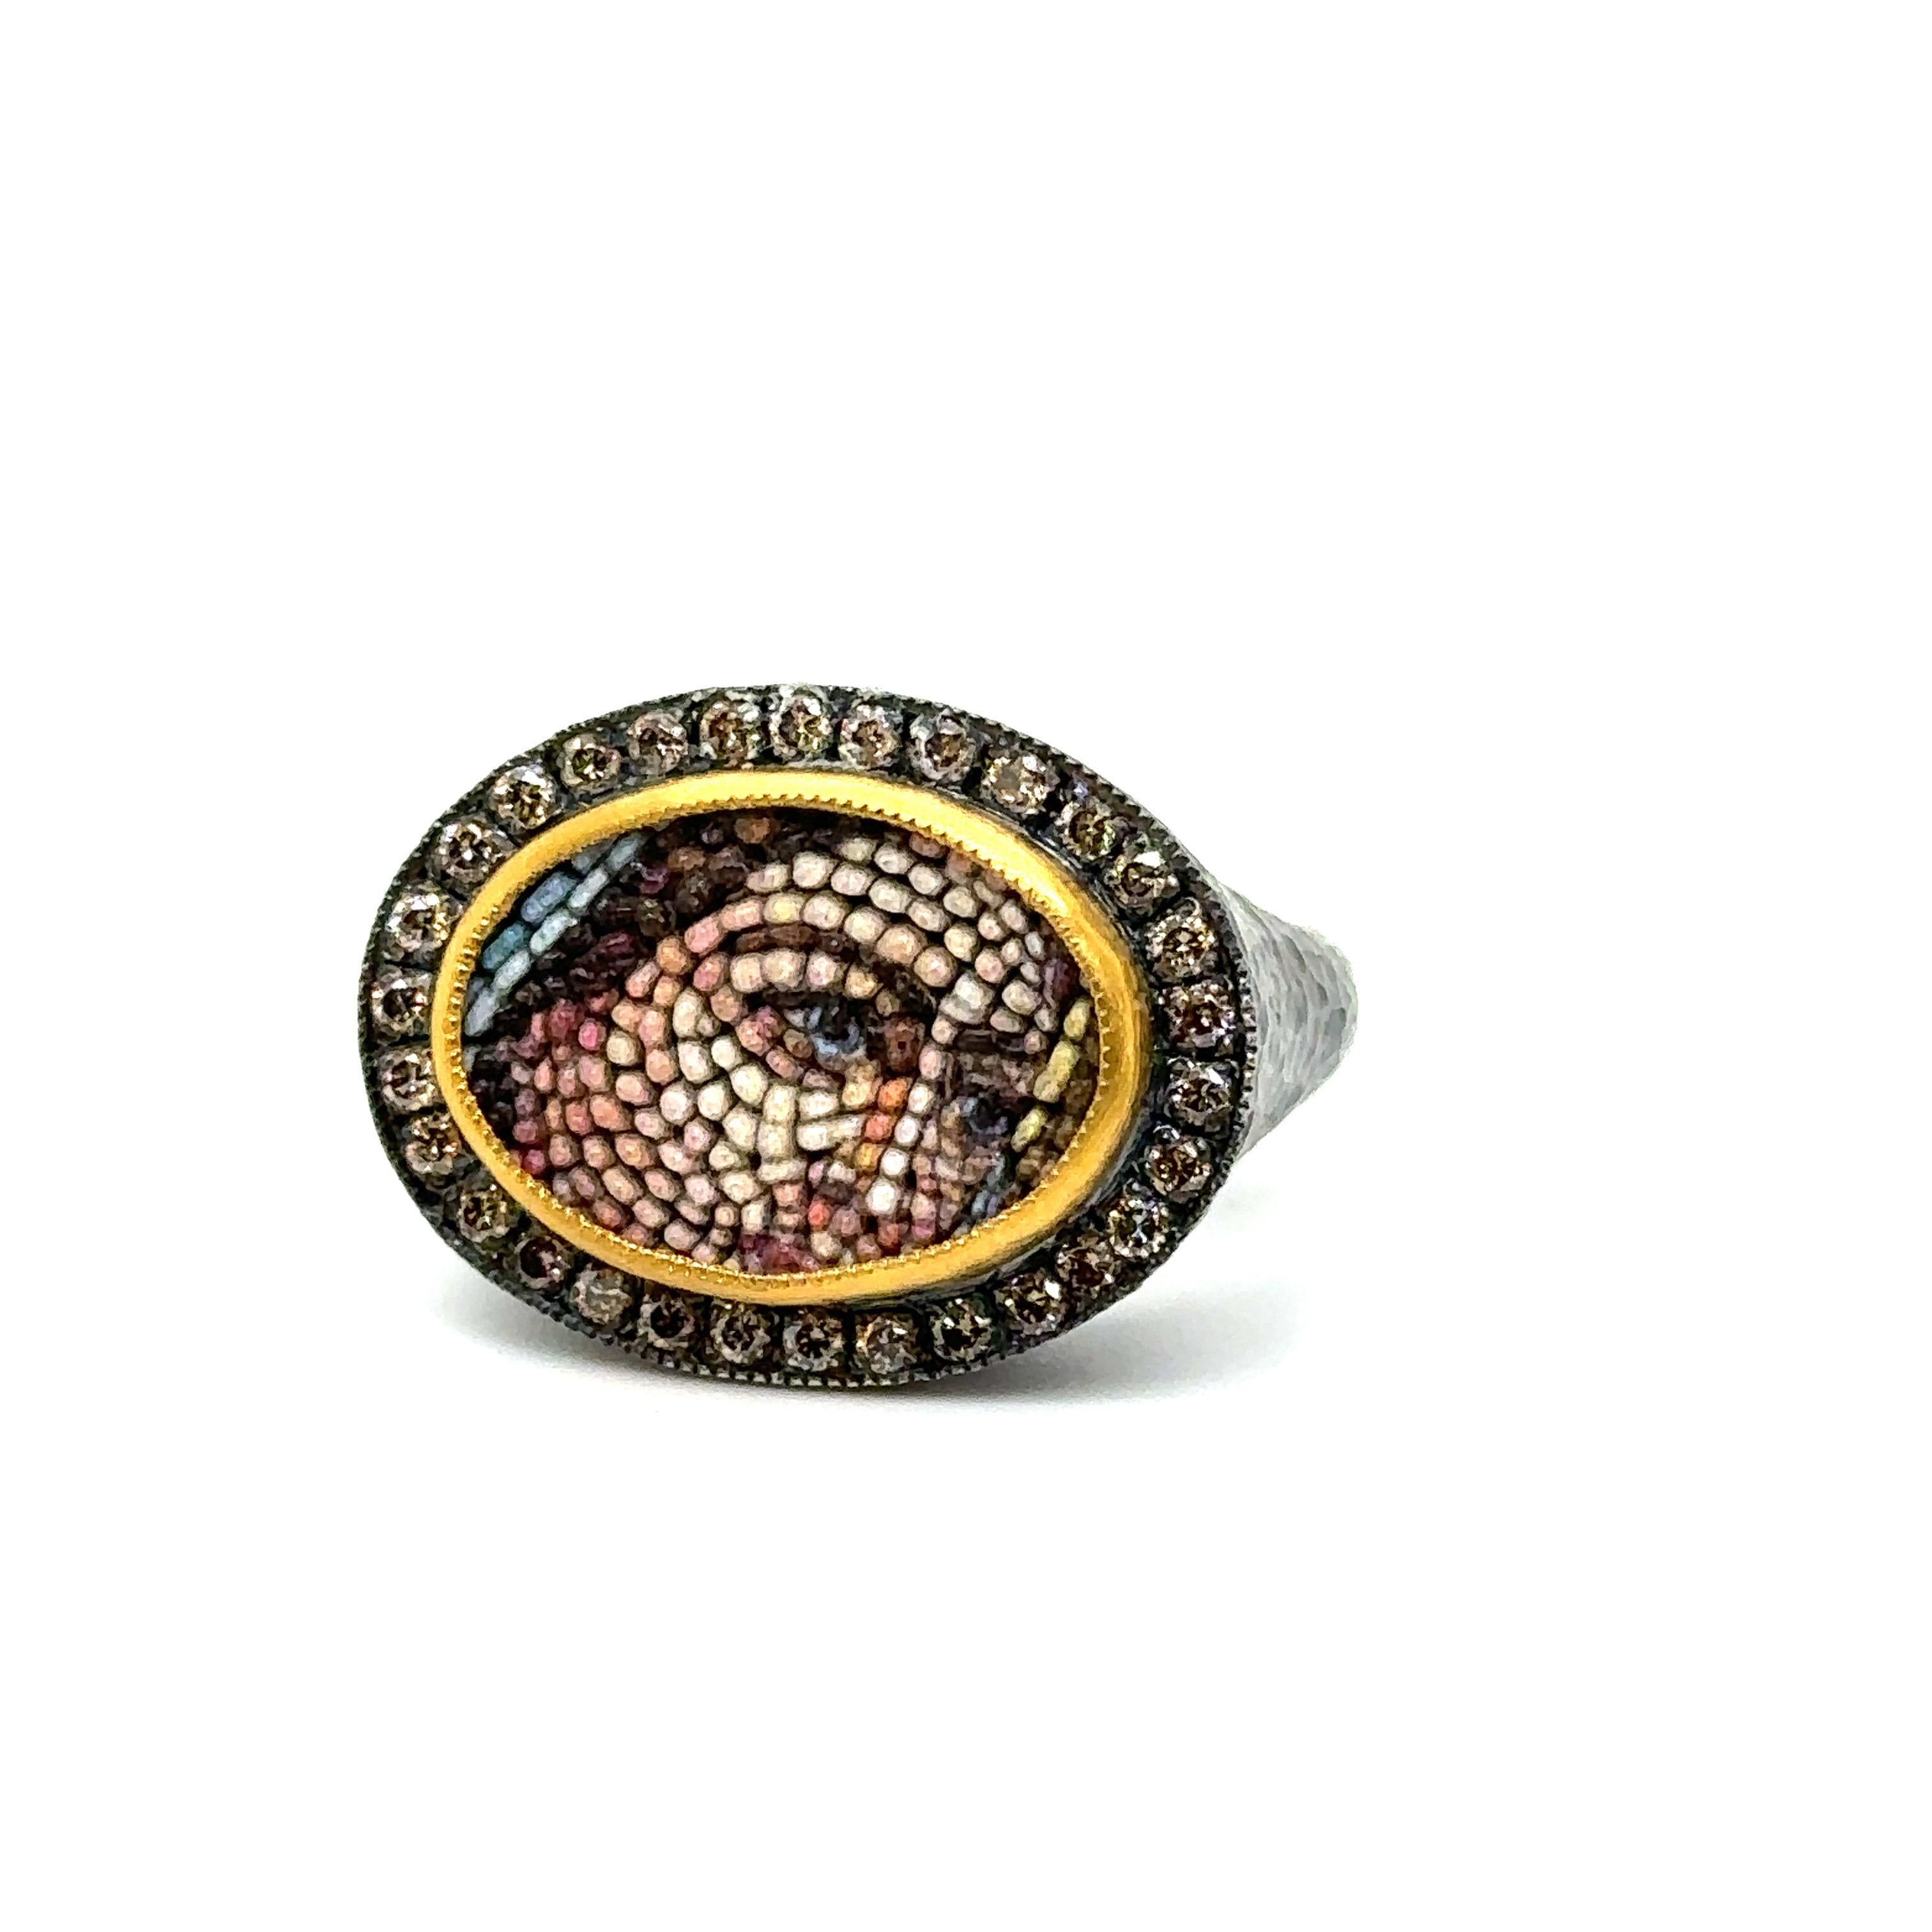 JAS-19-1966 - 24KT GOLD/SS MOSAIC RING with DIAMONDS  For Sale 1